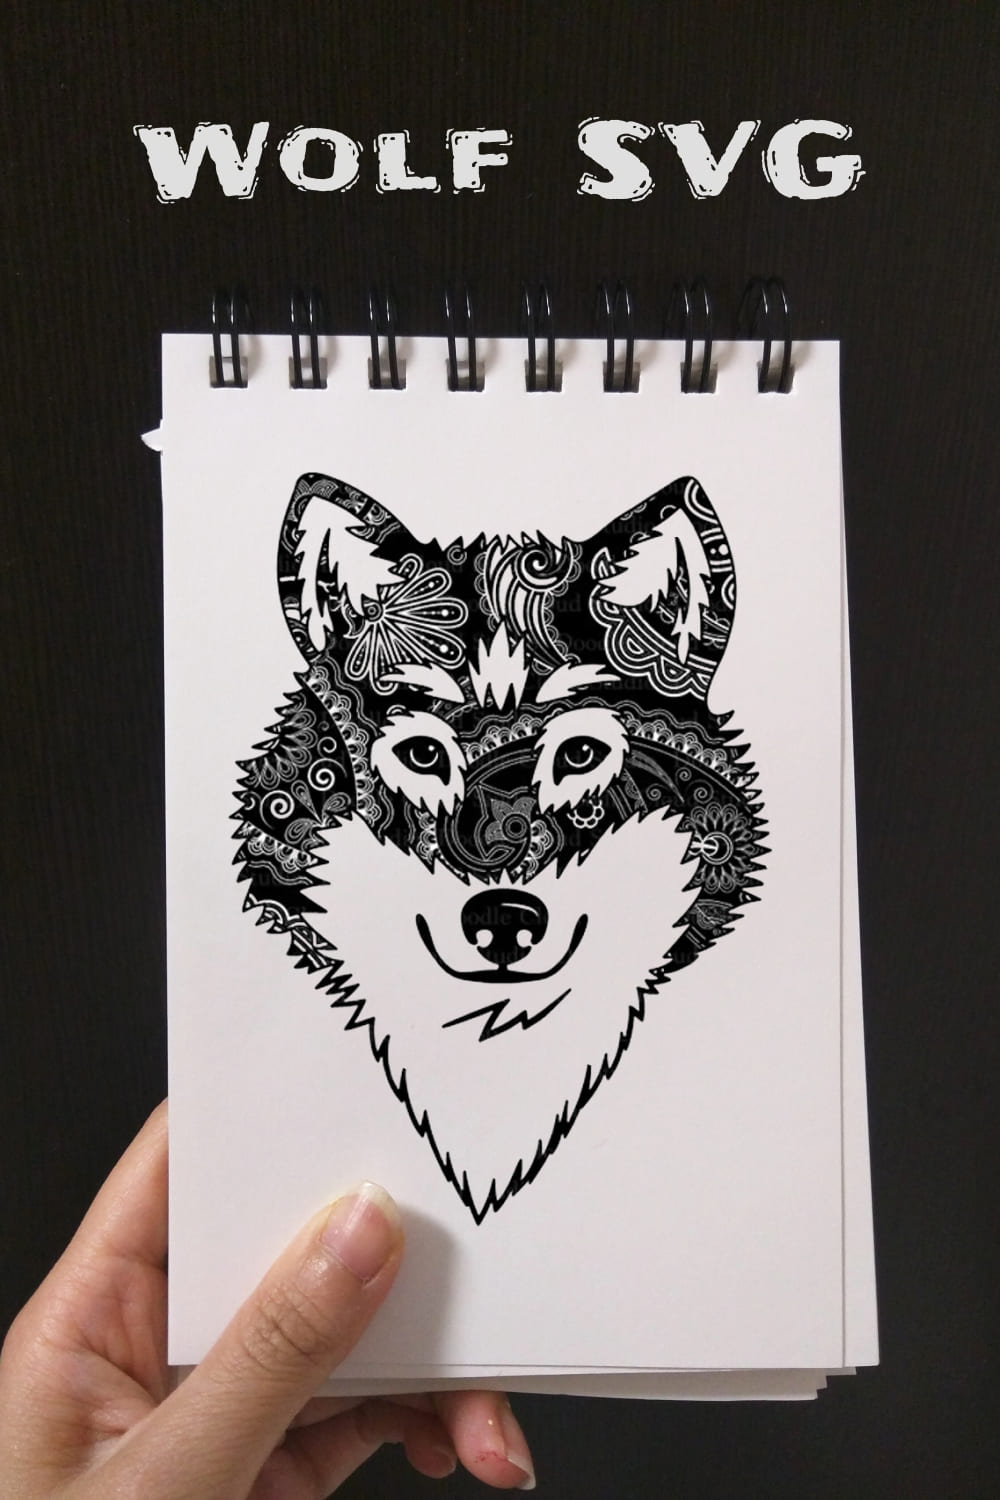 Hand holding a notebook with a drawing of a wolf.